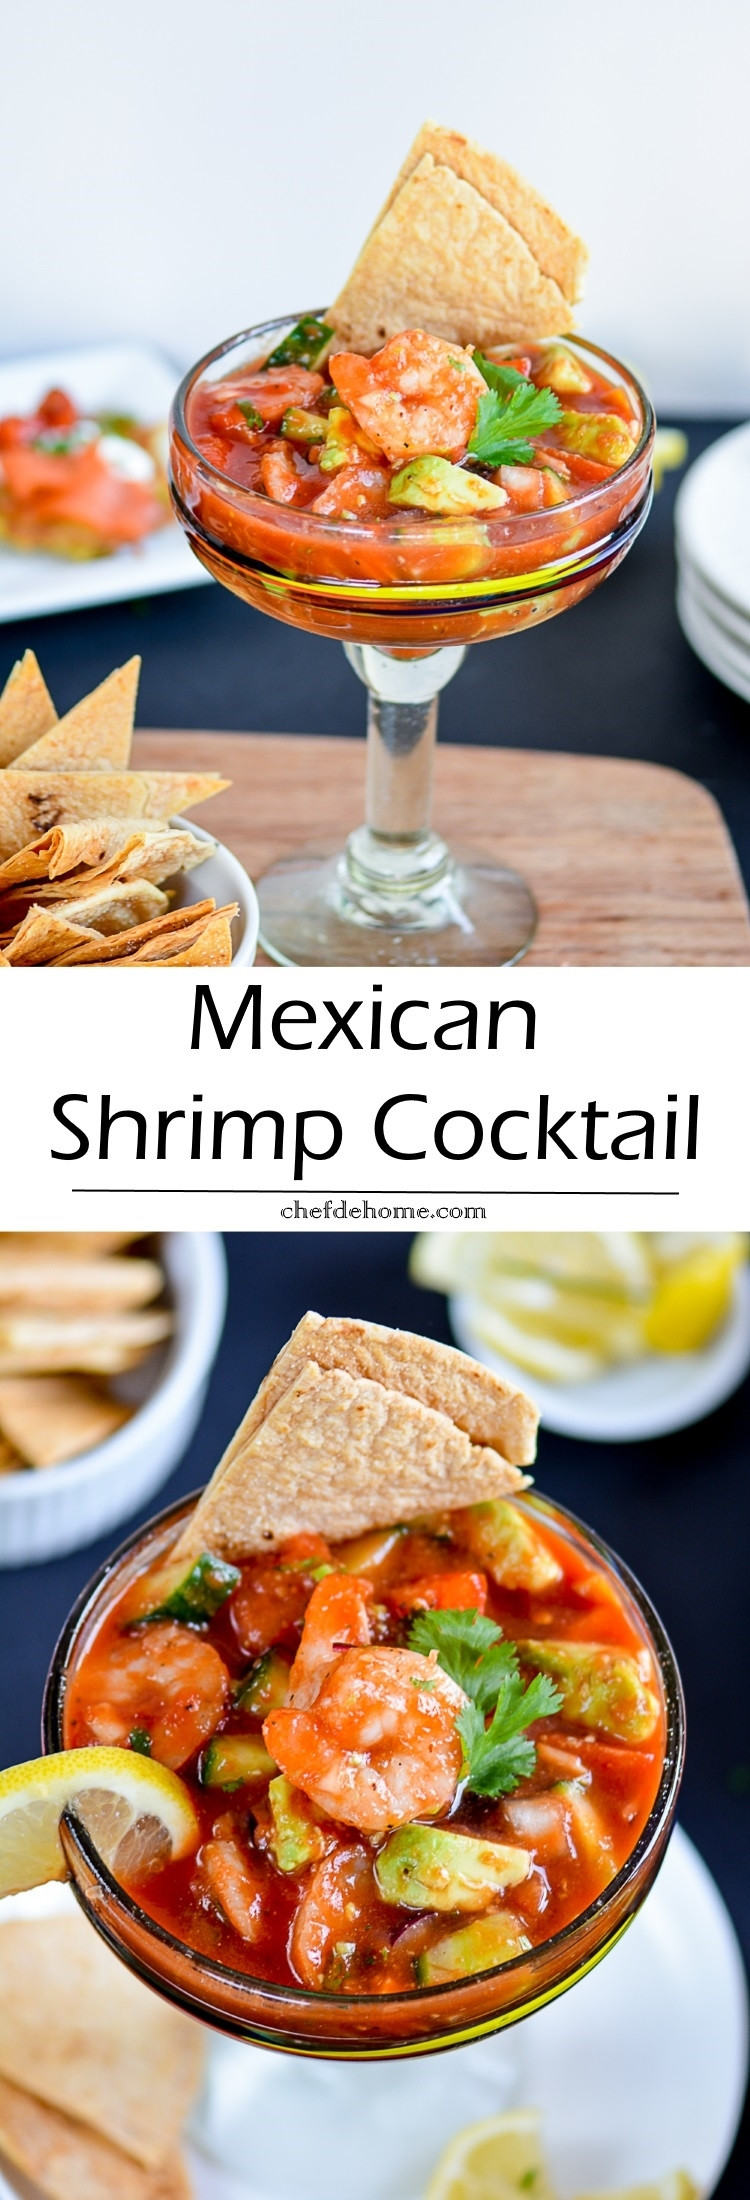 Mexican Seafood Cocktail Recipes
 Mexican Shrimp Cocktail Recipe